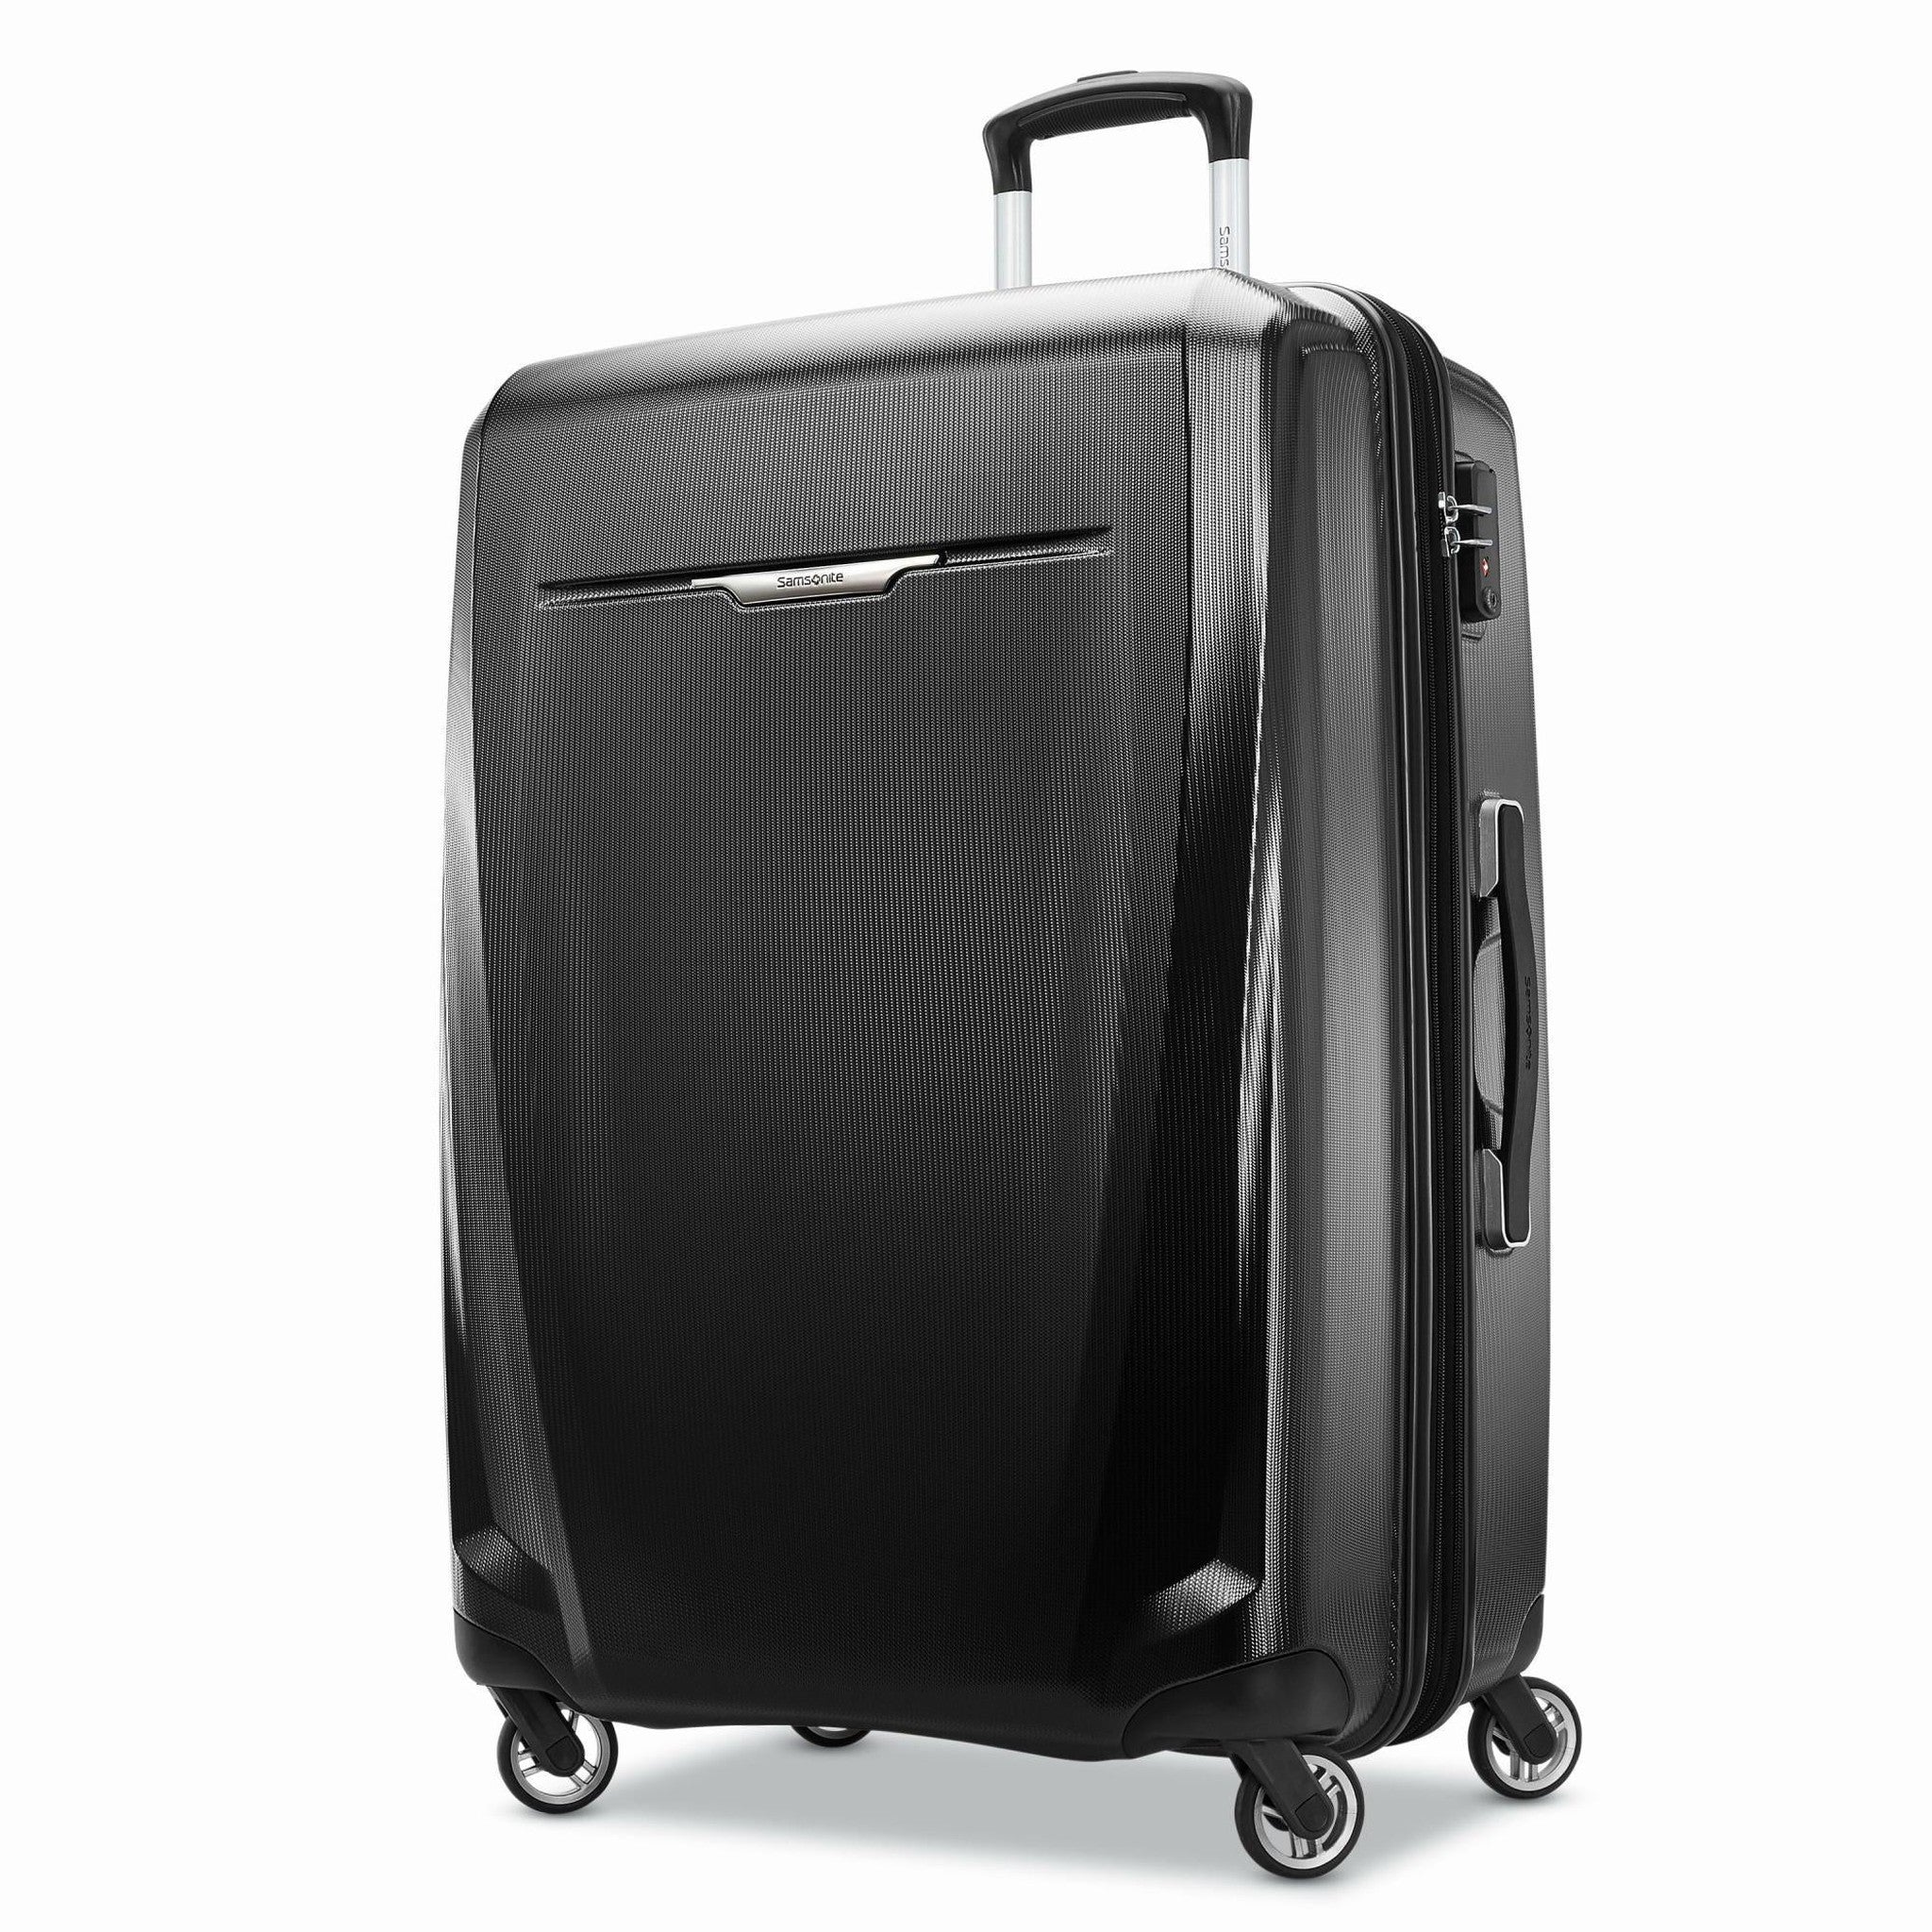 Samsonite Winfield 3 DLX Spinner 78/28 Checked Luggage – Luggage Pros